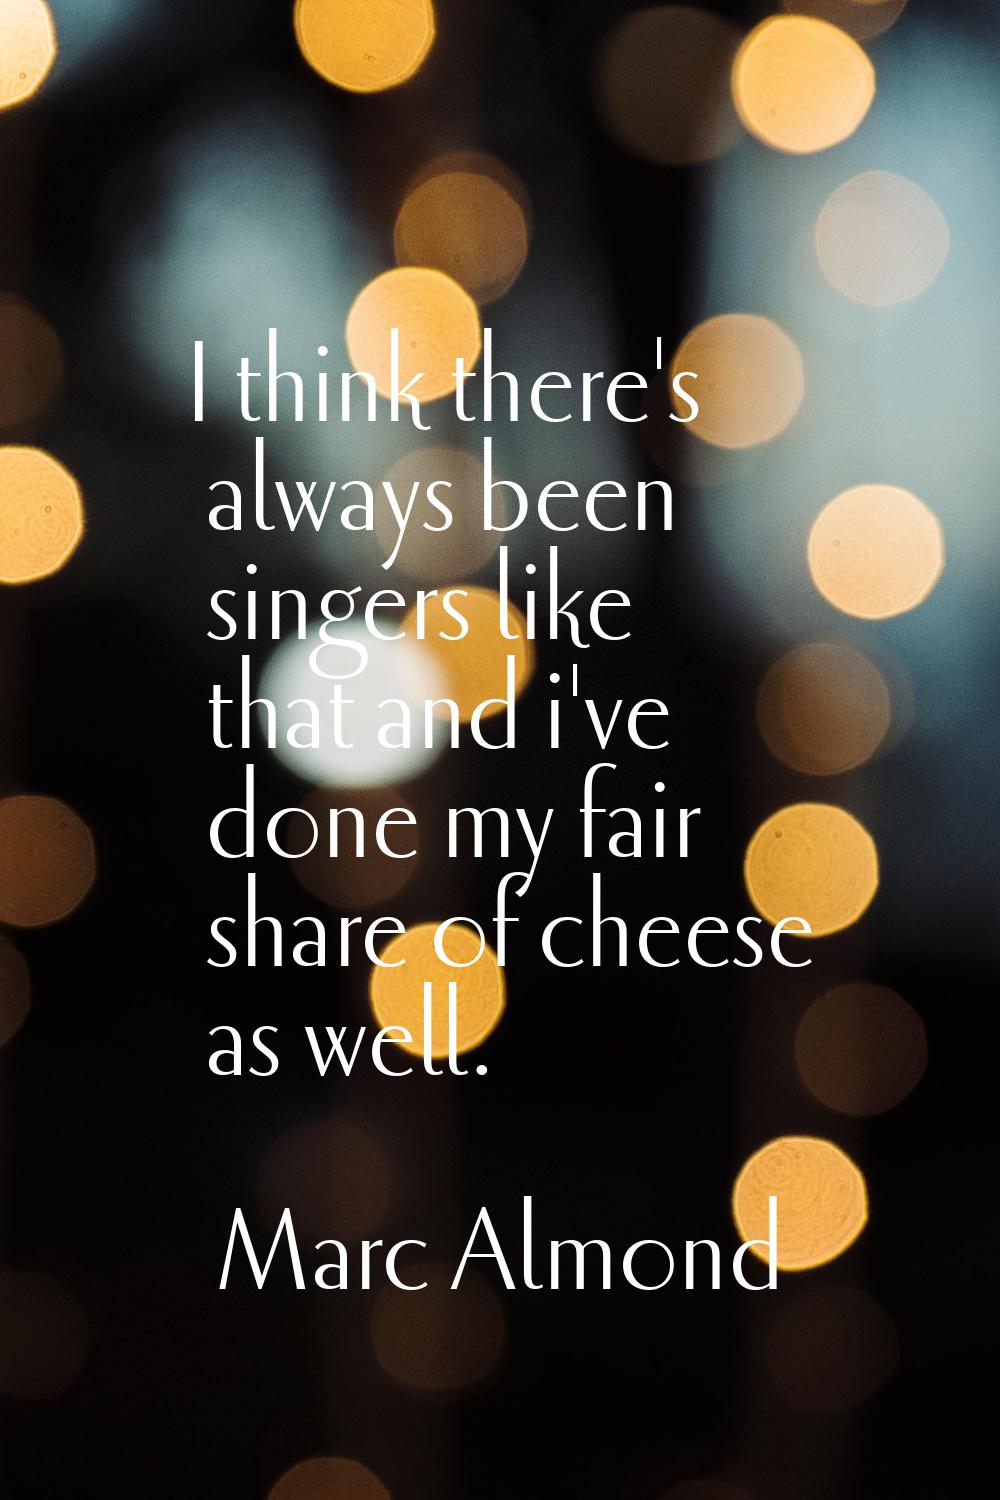 I think there's always been singers like that and i've done my fair share of cheese as well.